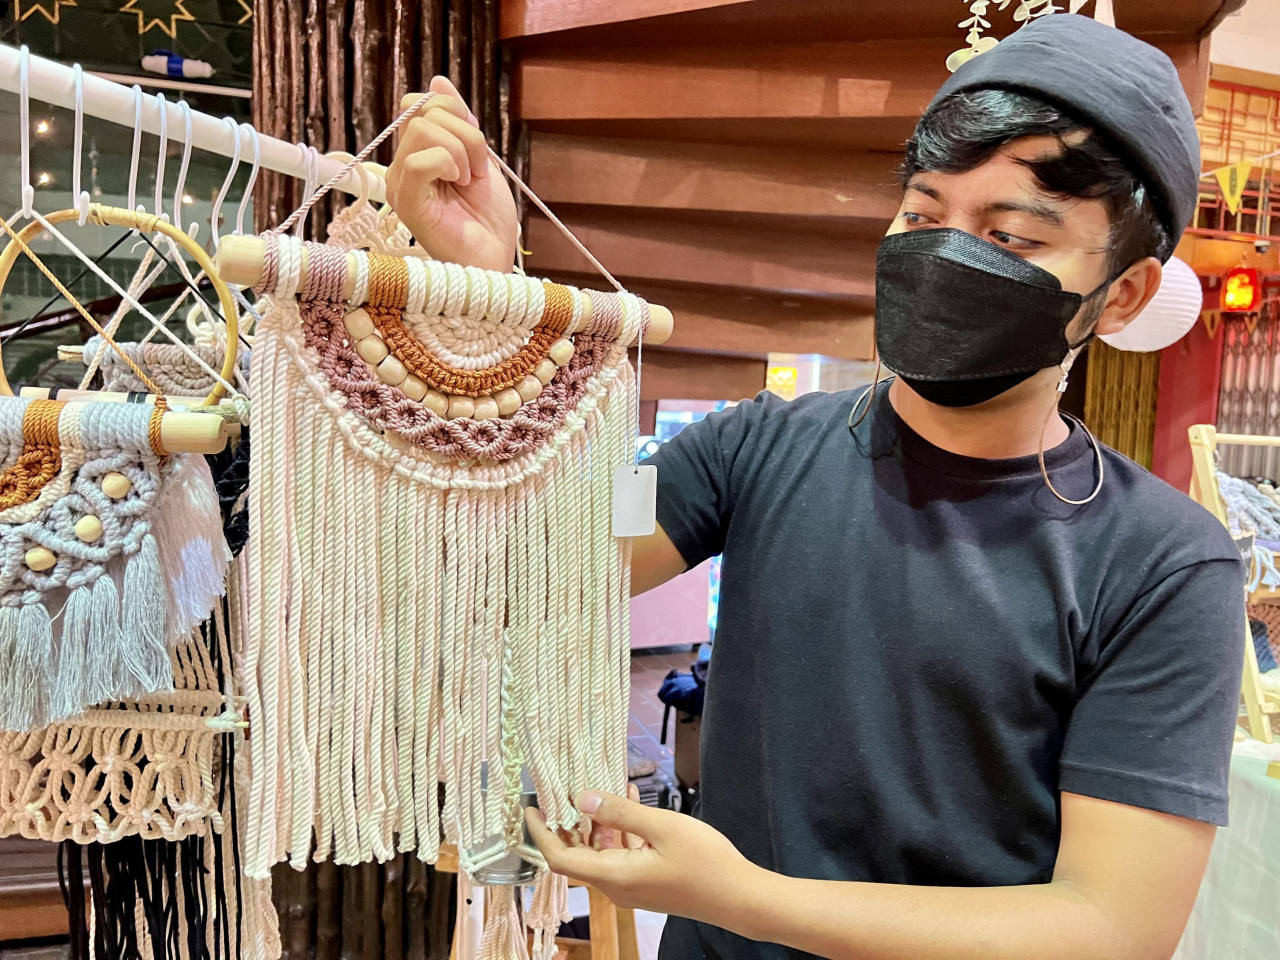 Artboy founder Muhammad Hajid Mohamed Azhar, was one of the participating vendors present at Central Market, selling kufic art and handmade macrame goods. — The Vibes/Amalina Kamal